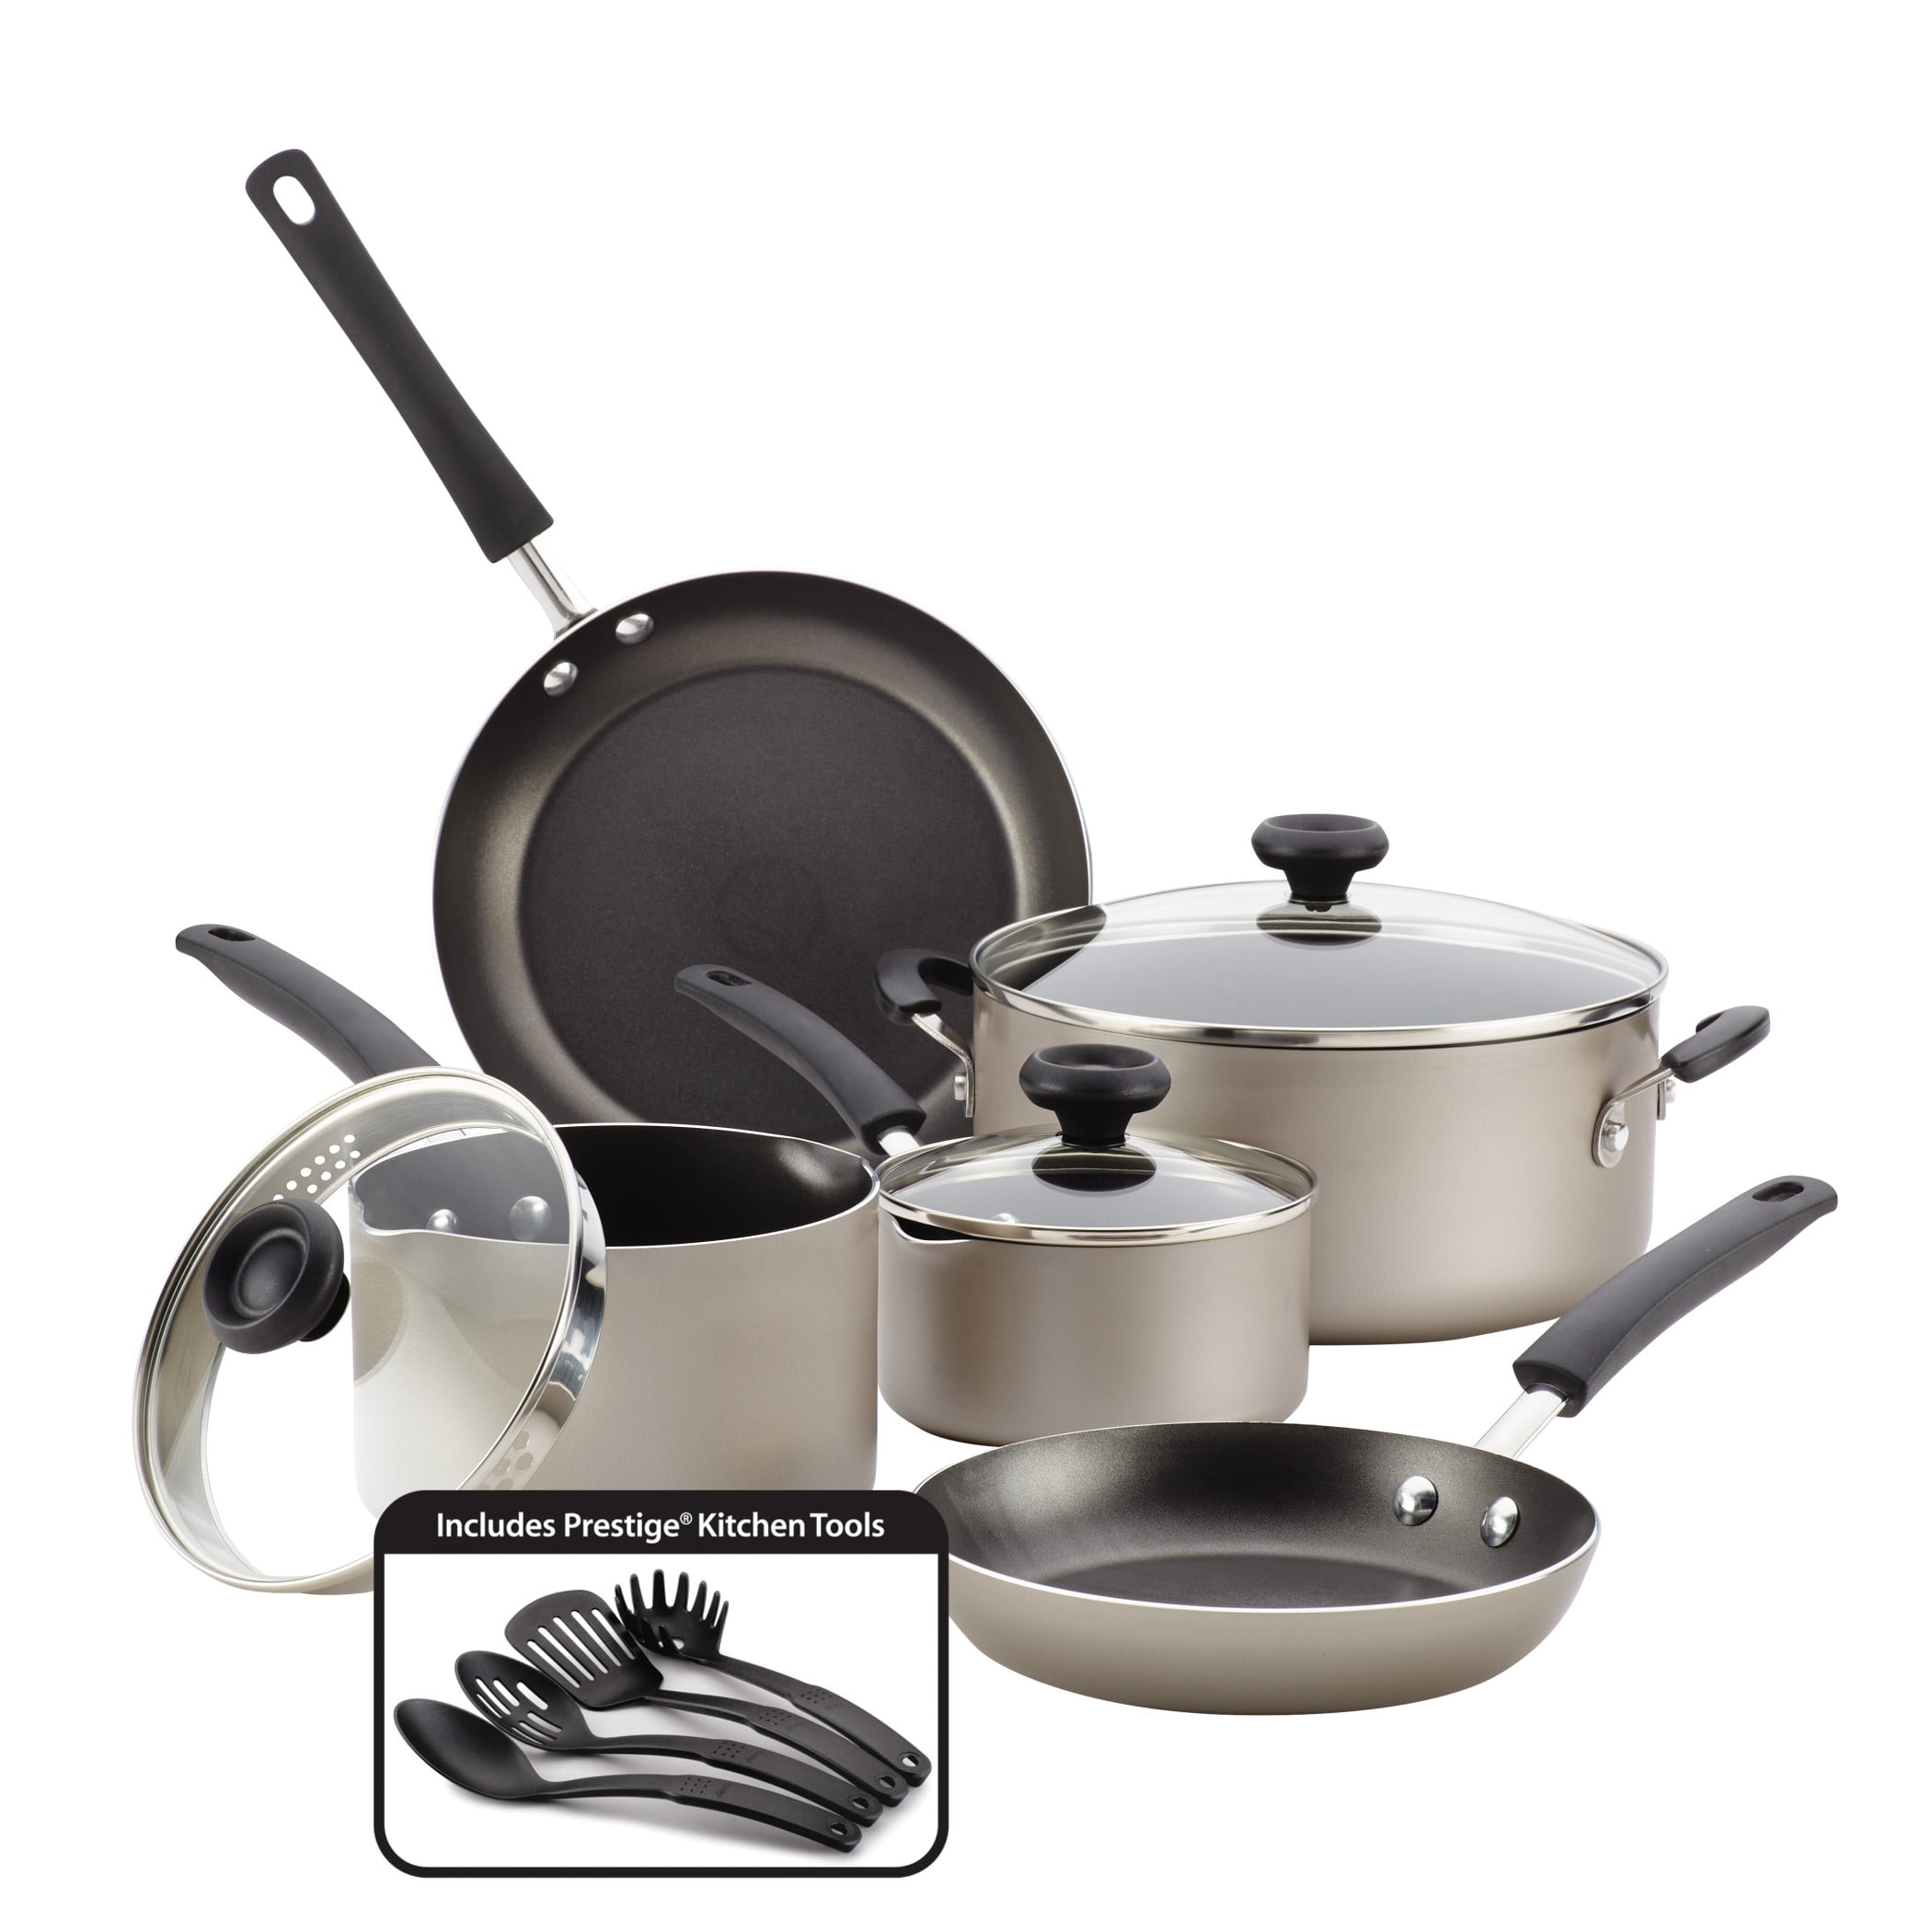 Farberware 12-Piece Easy Clean Nonstick Pots and Pans/Cookware Set Black 